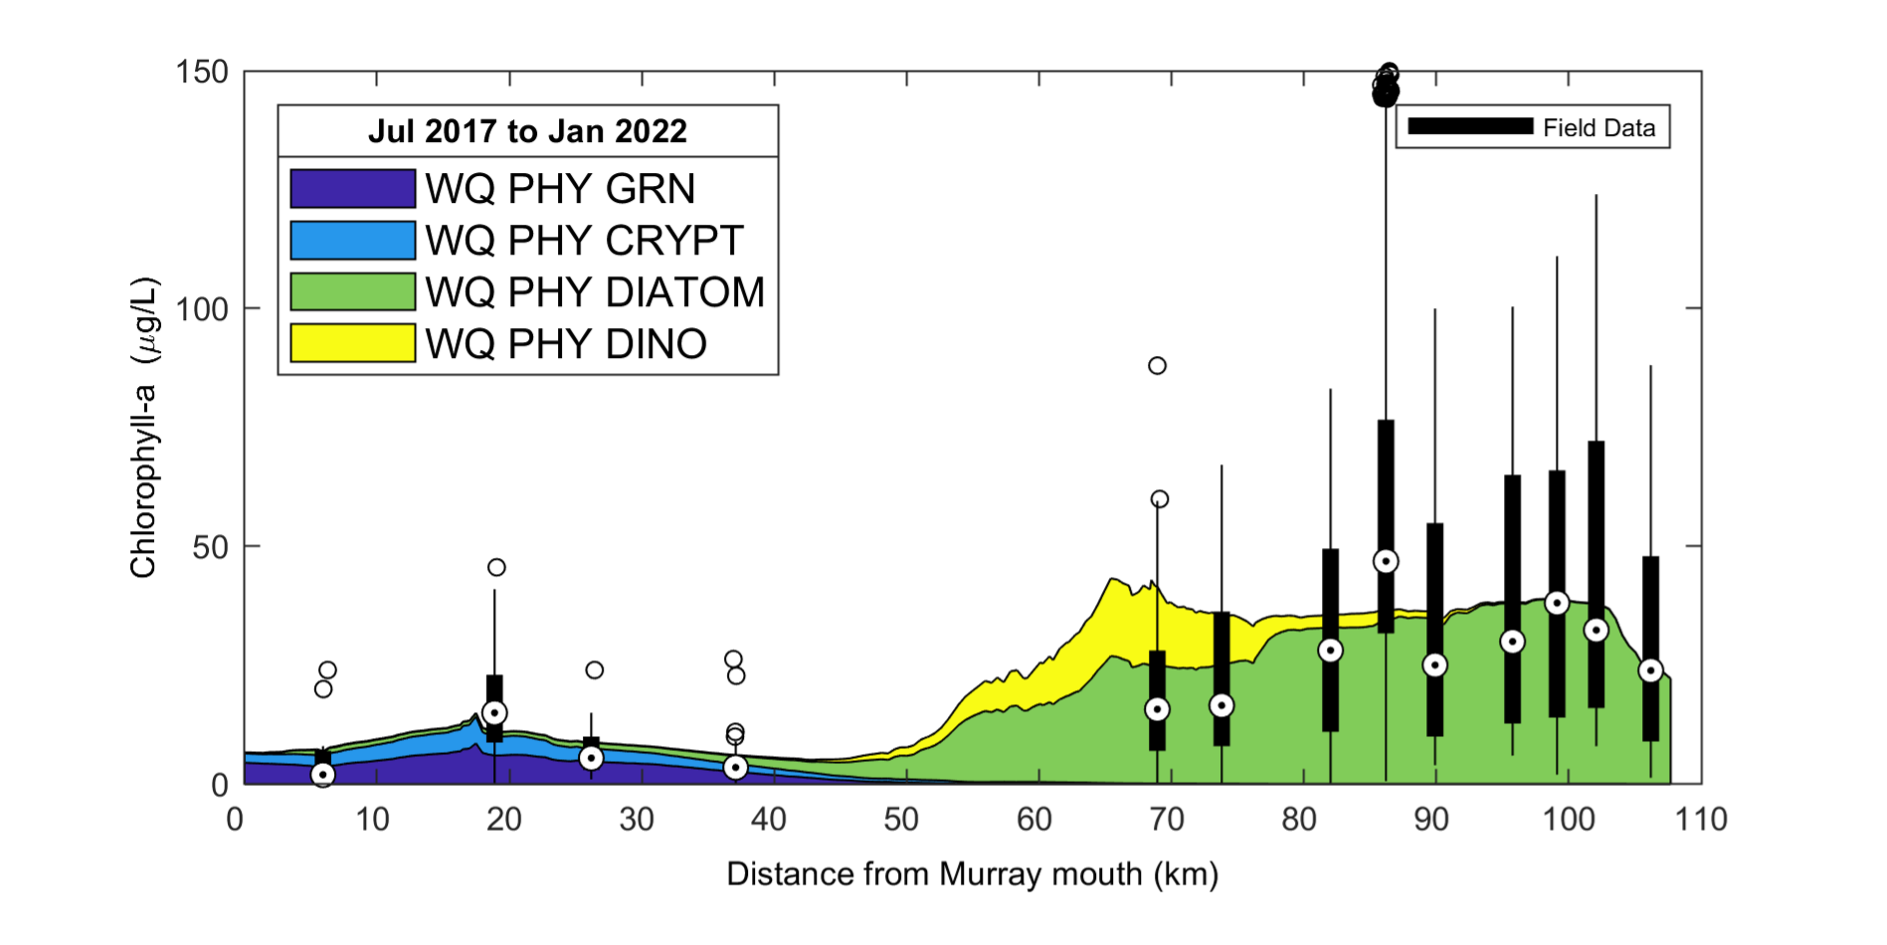 Simulated and observed chlorophyll-a concentration along the length of the Coorong from the Murray Mouth. The observed (field) data is from available monitoring over the period from Jul 2017 to Jan 2022, presented as a box-whisker plot for each site based on all data available for that site. The simulated data is shaded based on the PFT (group) contribution to the total phytoplankton biomass.